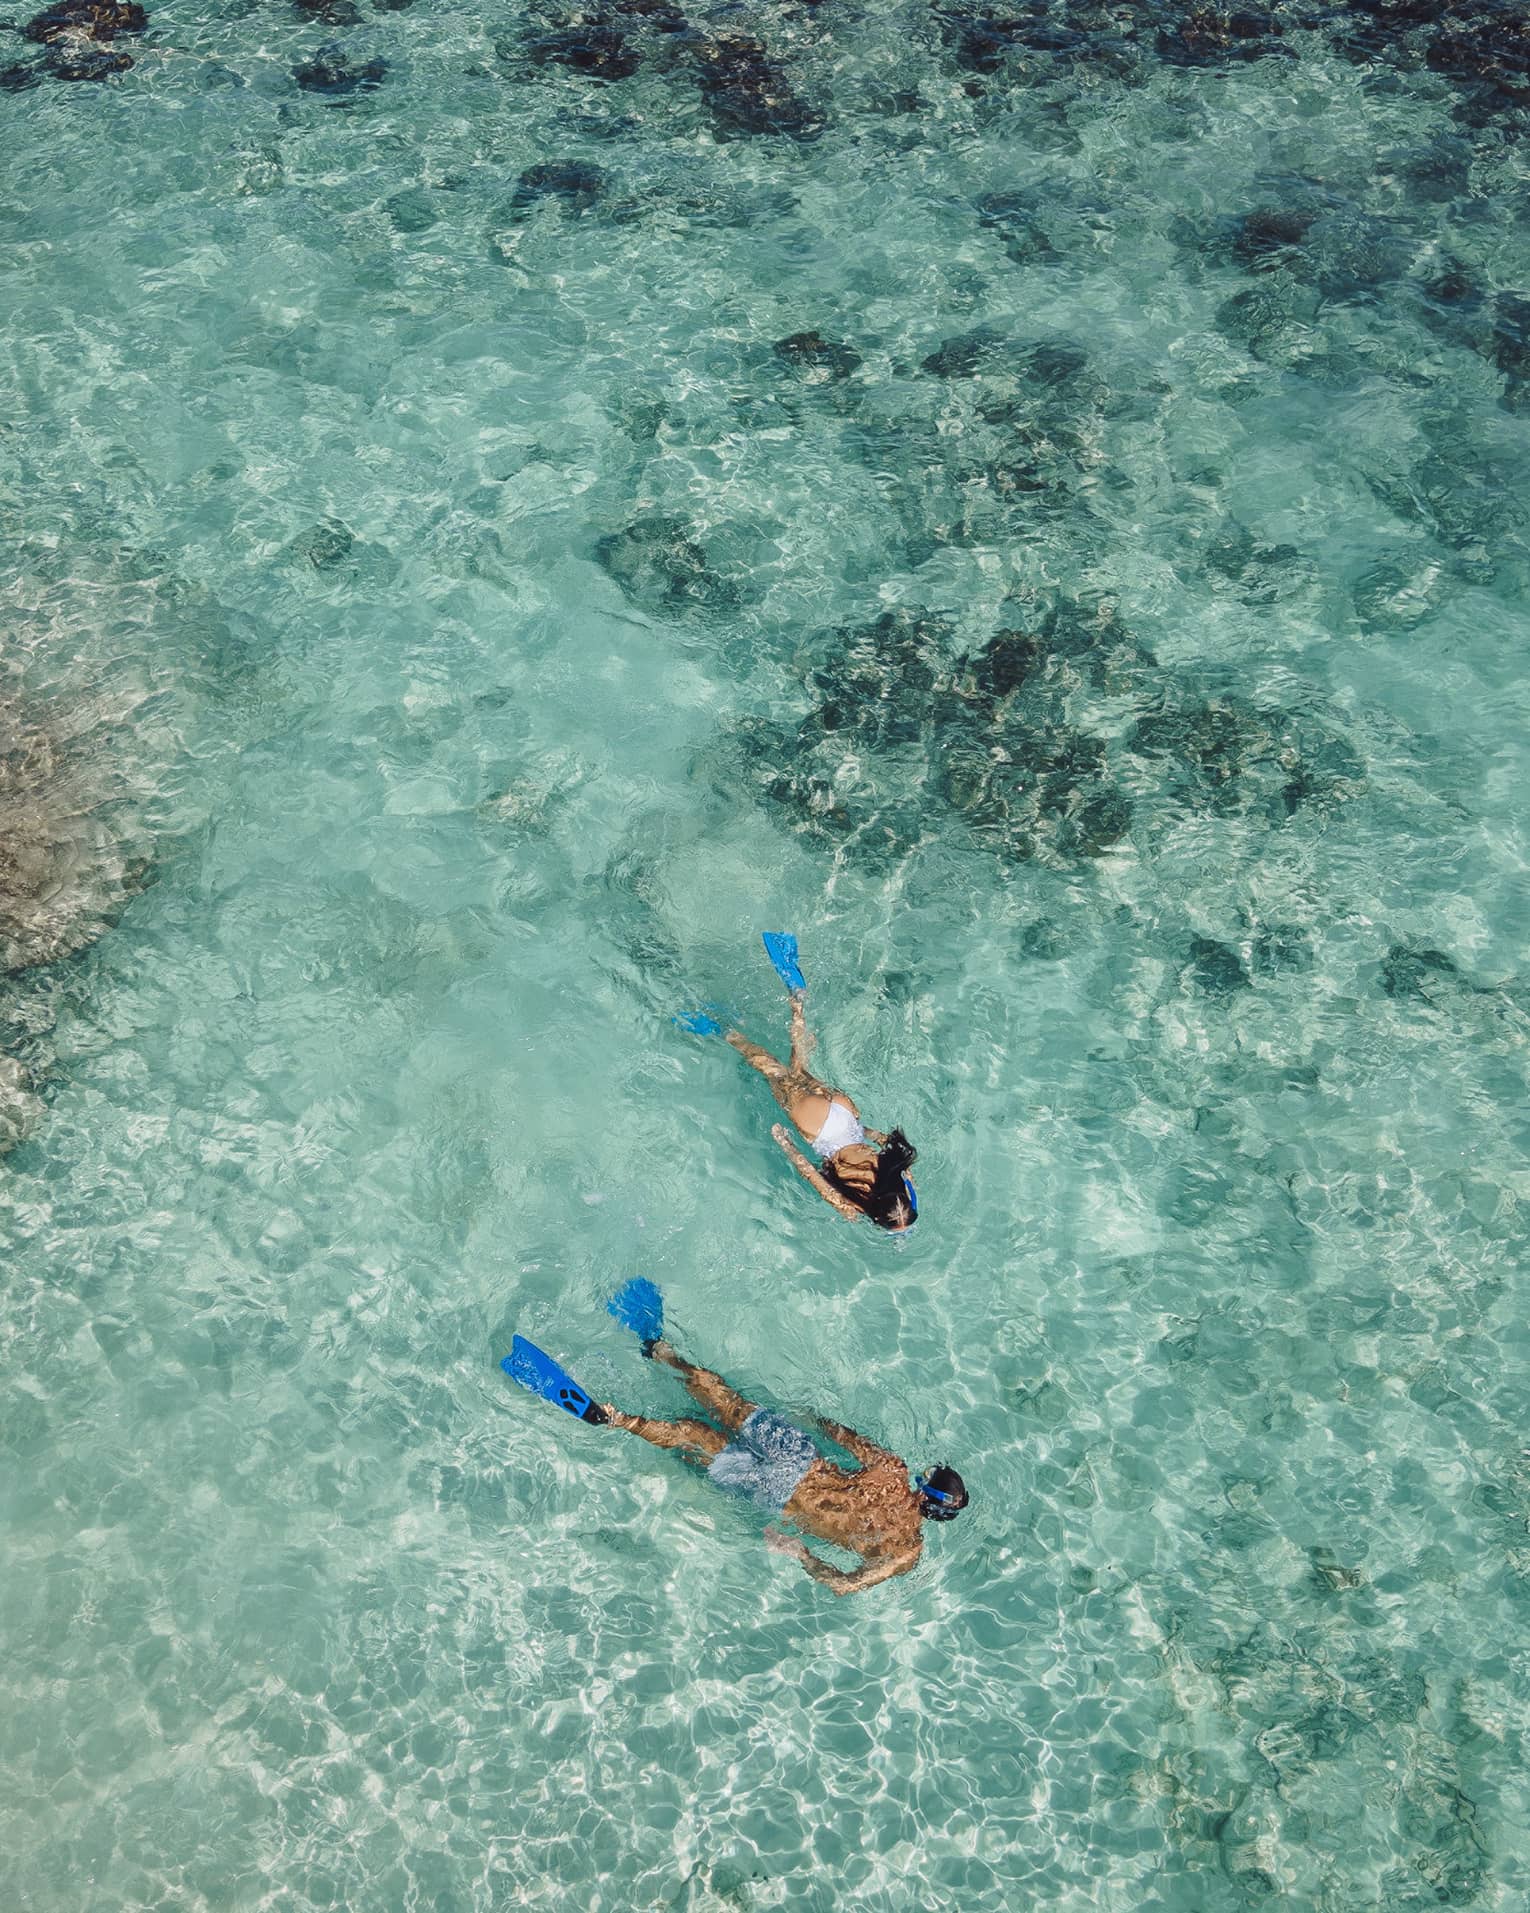 Aerial view of two snorkellers wearing blue flippers in an expanse of shallow, turquoise waters rippling over the reef.